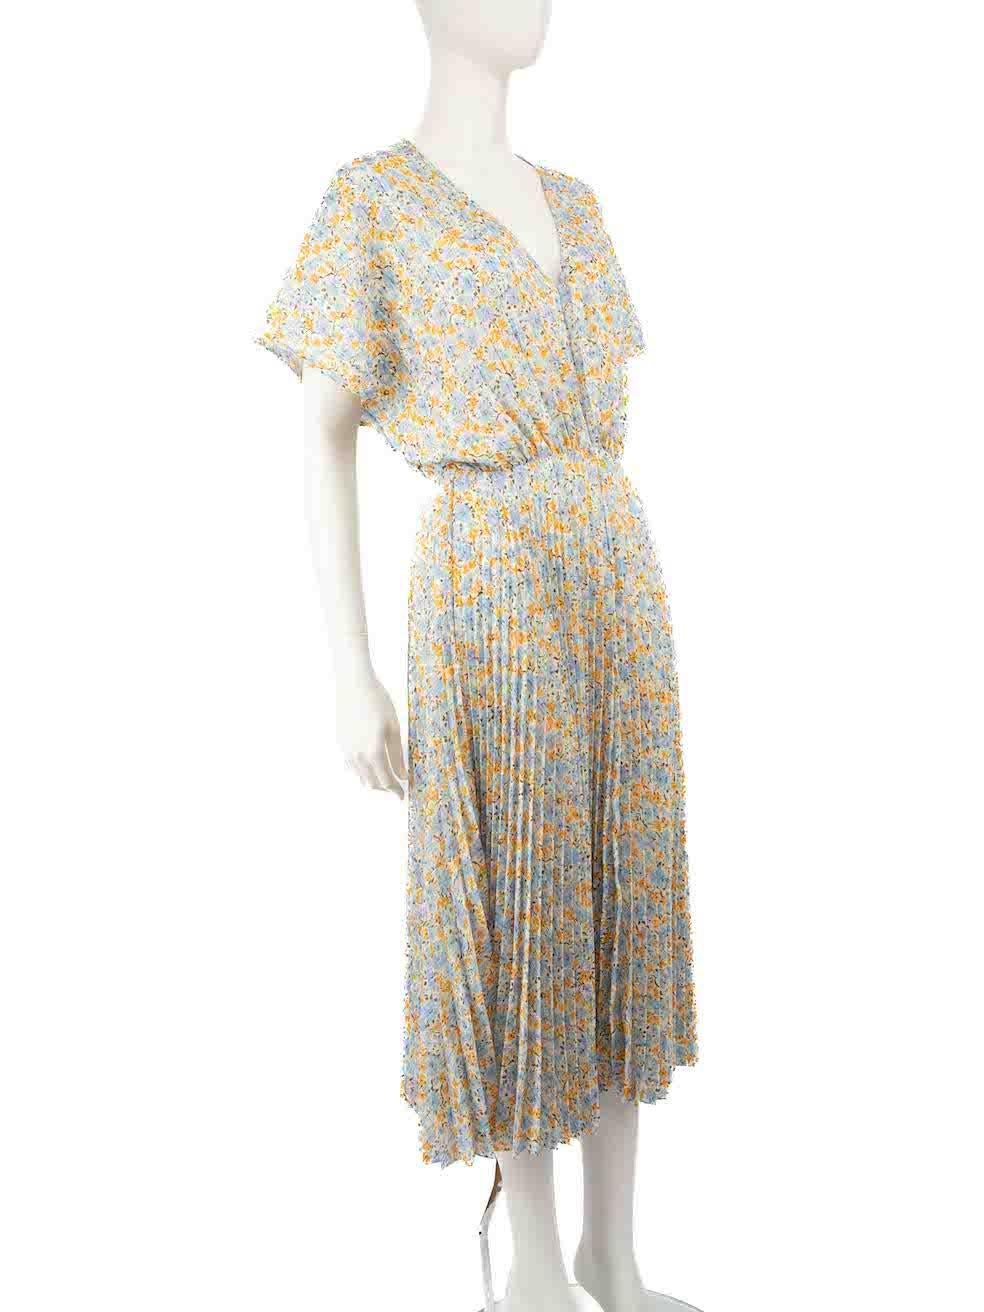 CONDITION is Very good. Hardly any visible wear to dress is evident on this used Samsøe Samsøe designer resale item. This item comes with detachable slip dress.
 
 
 
 Details
 
 
 Multicolour- blue, orange
 
 Polyester
 
 Dress
 
 Detachable slip